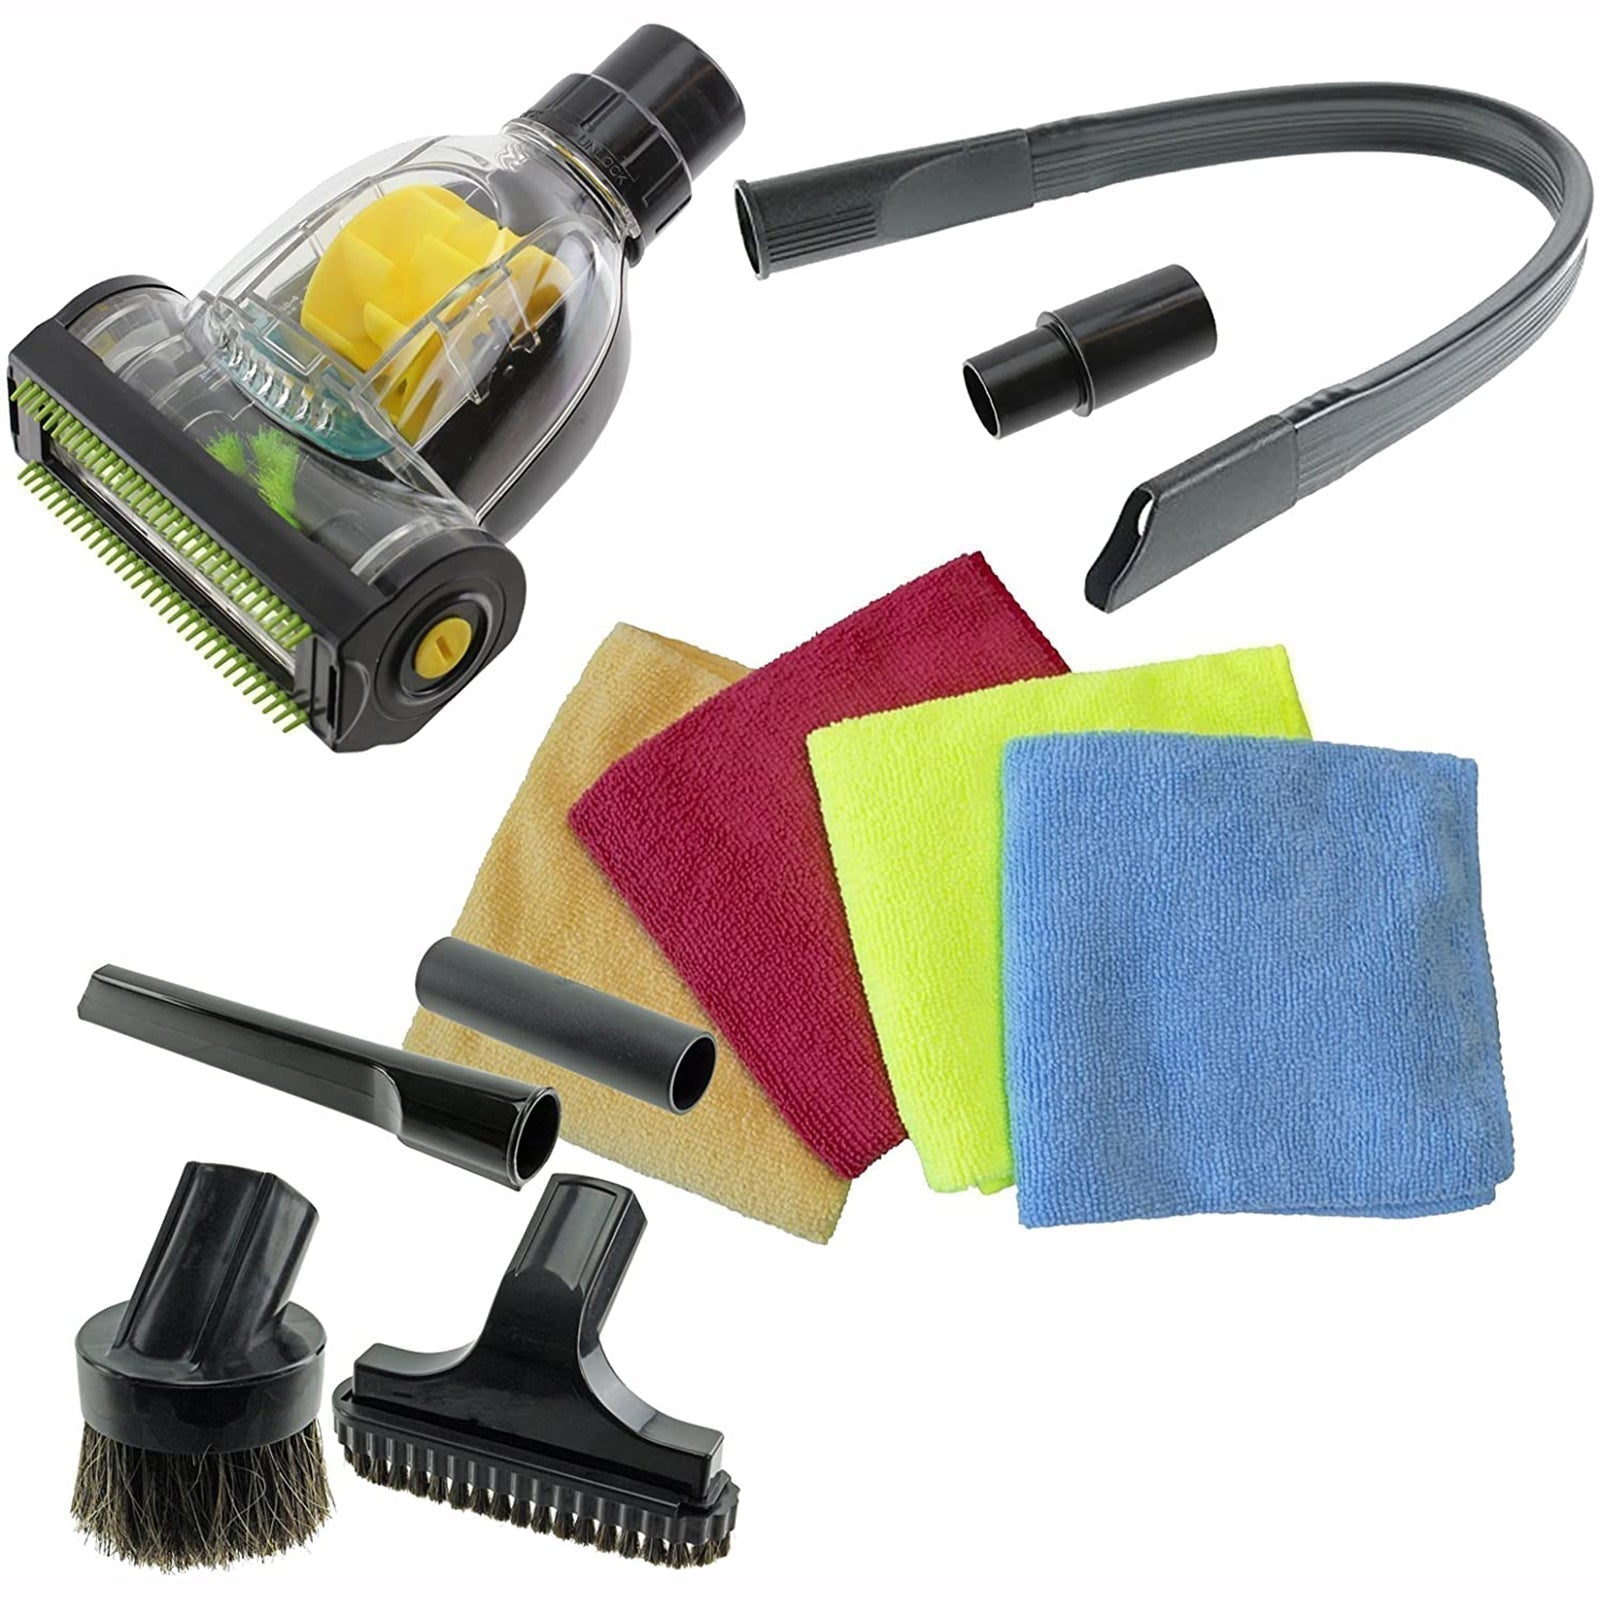 Car Valet Cleaning Tool Kit compatible with KRUPS Vacuum Cleaner (32mm/35mm)